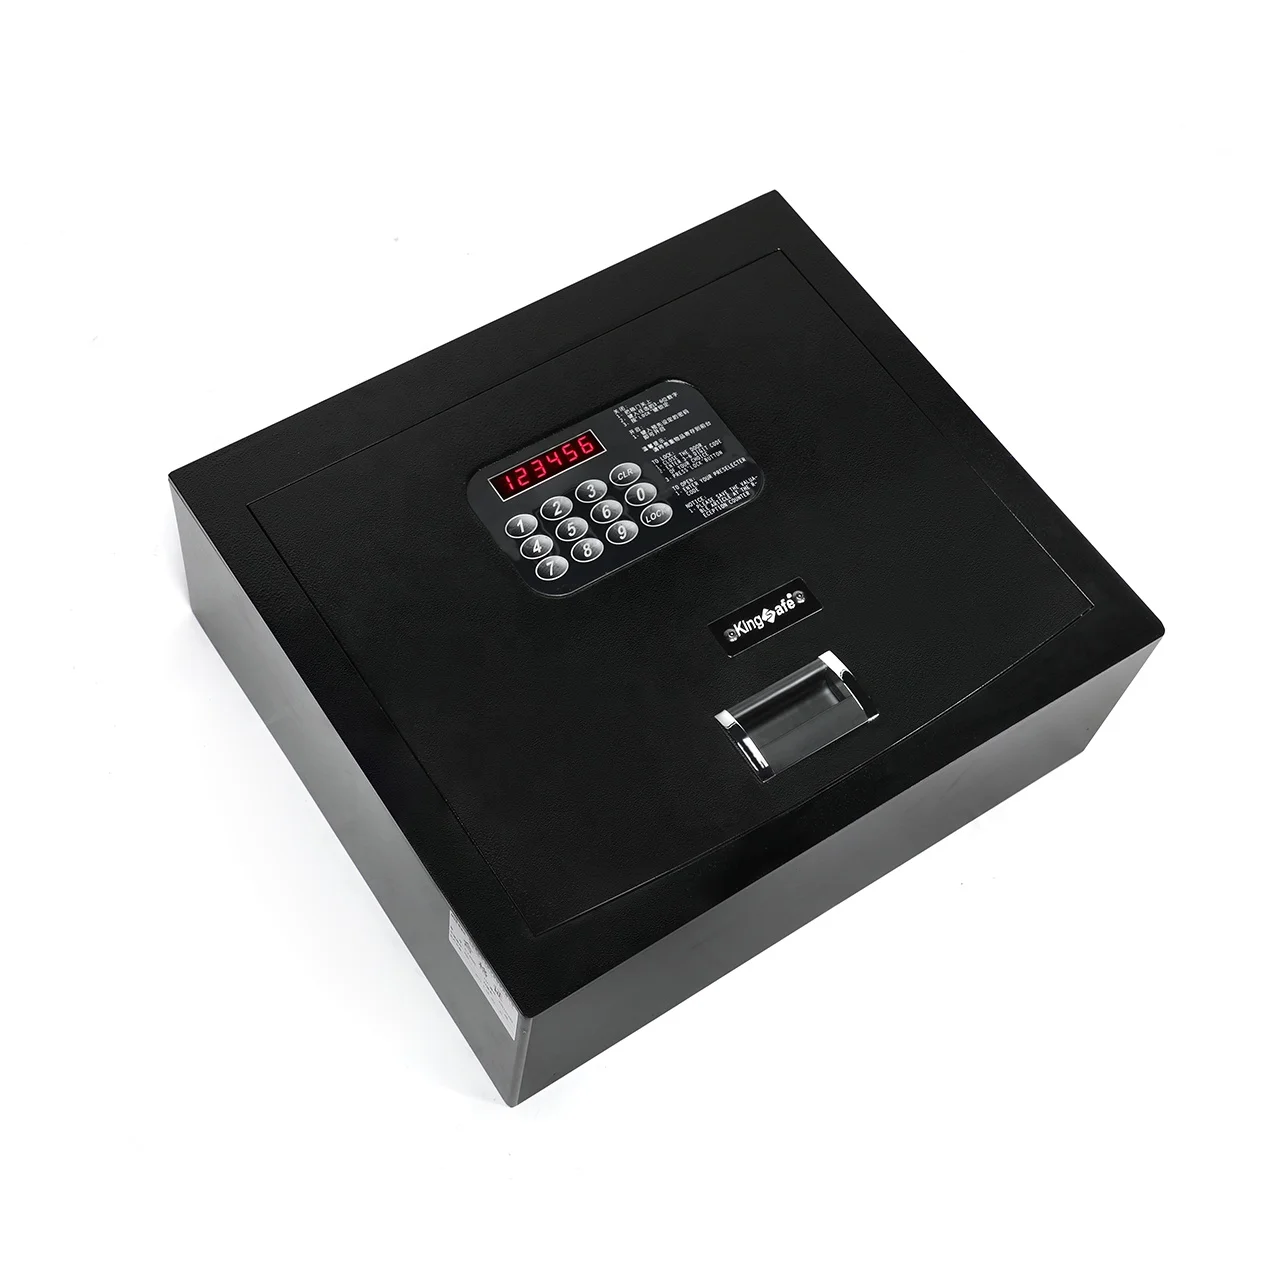 Electronic 15 inch laptop size safe digital hotel room safe box with master passwords